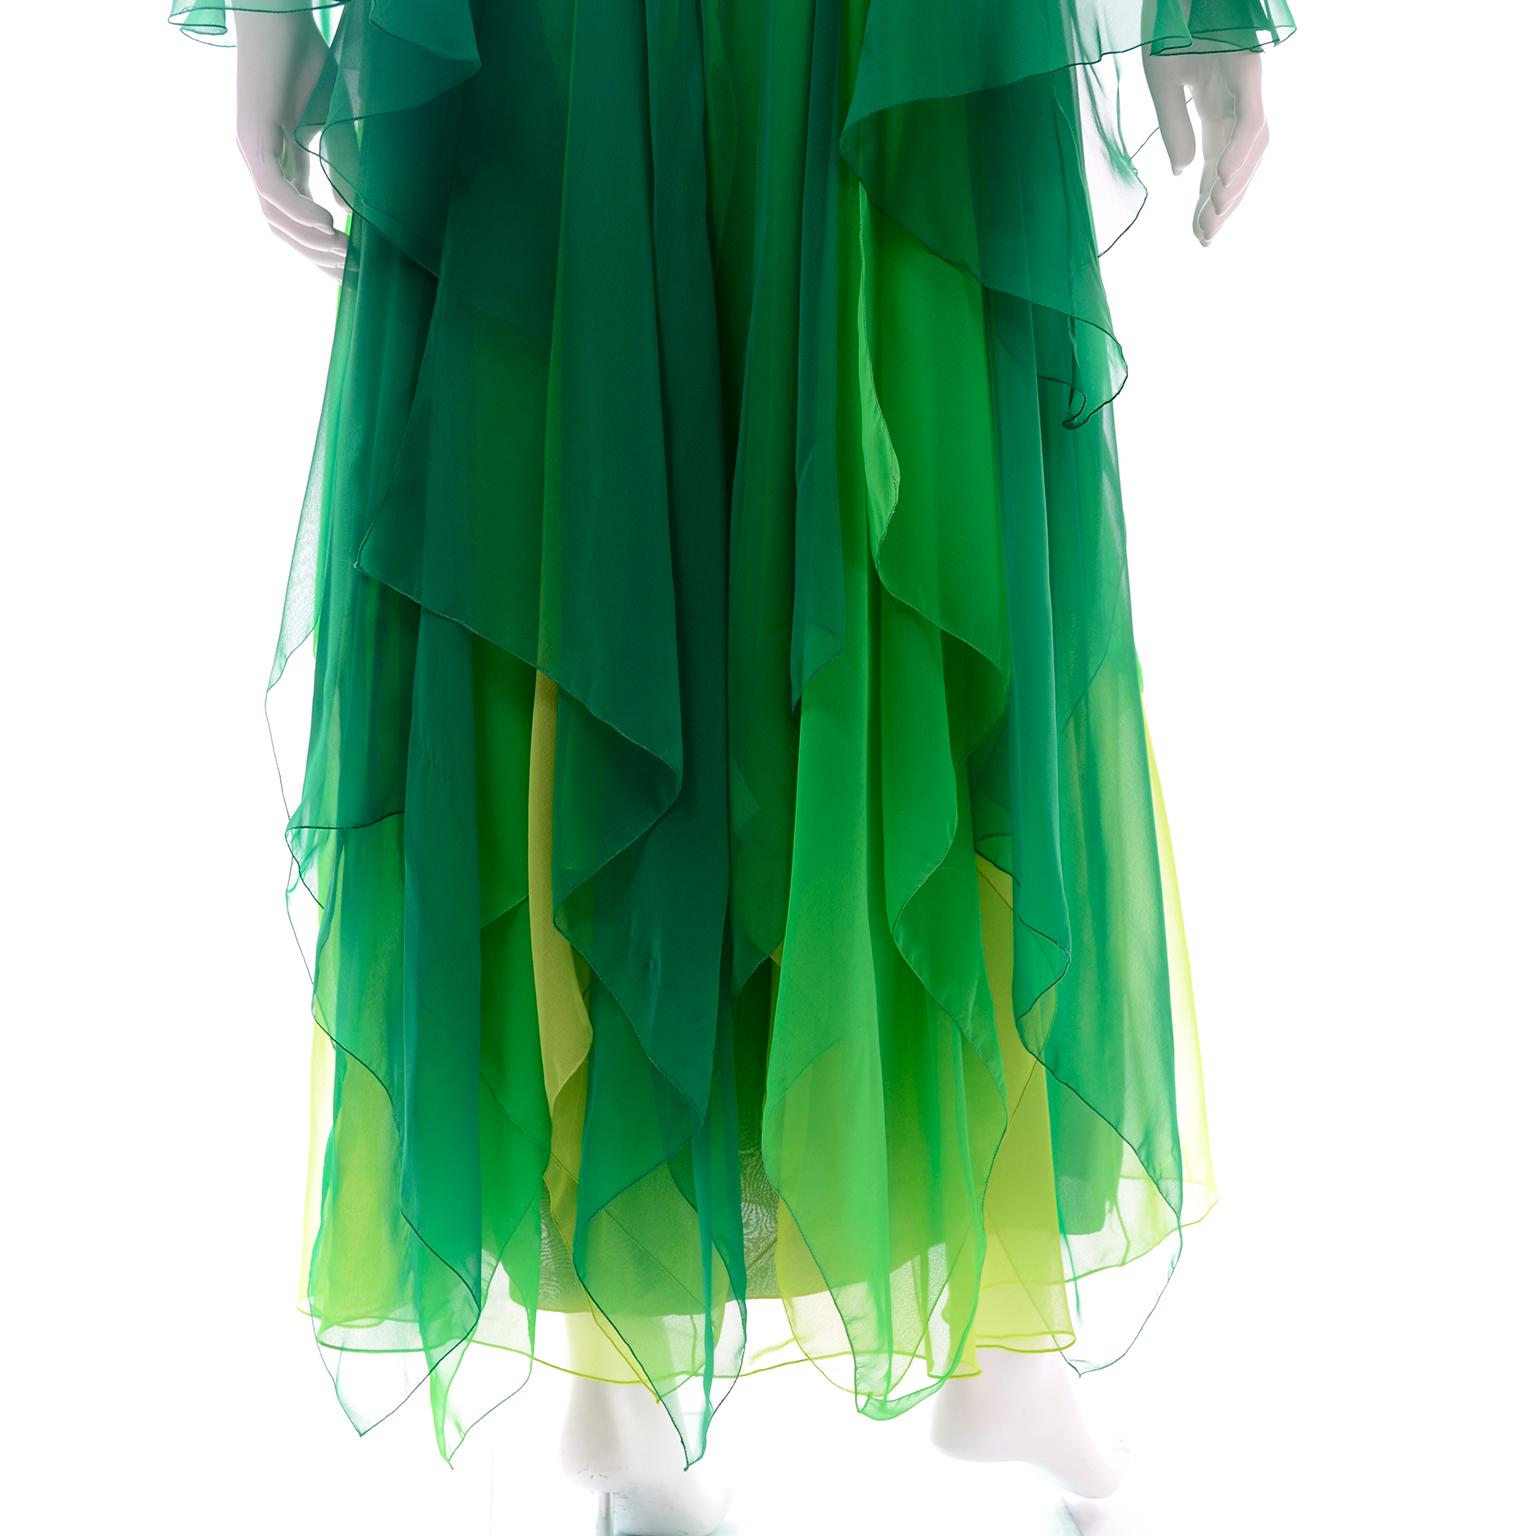 Vintage Layered Flowing Evening Dress in Multi Shades of Green Silk Chiffon  For Sale 2